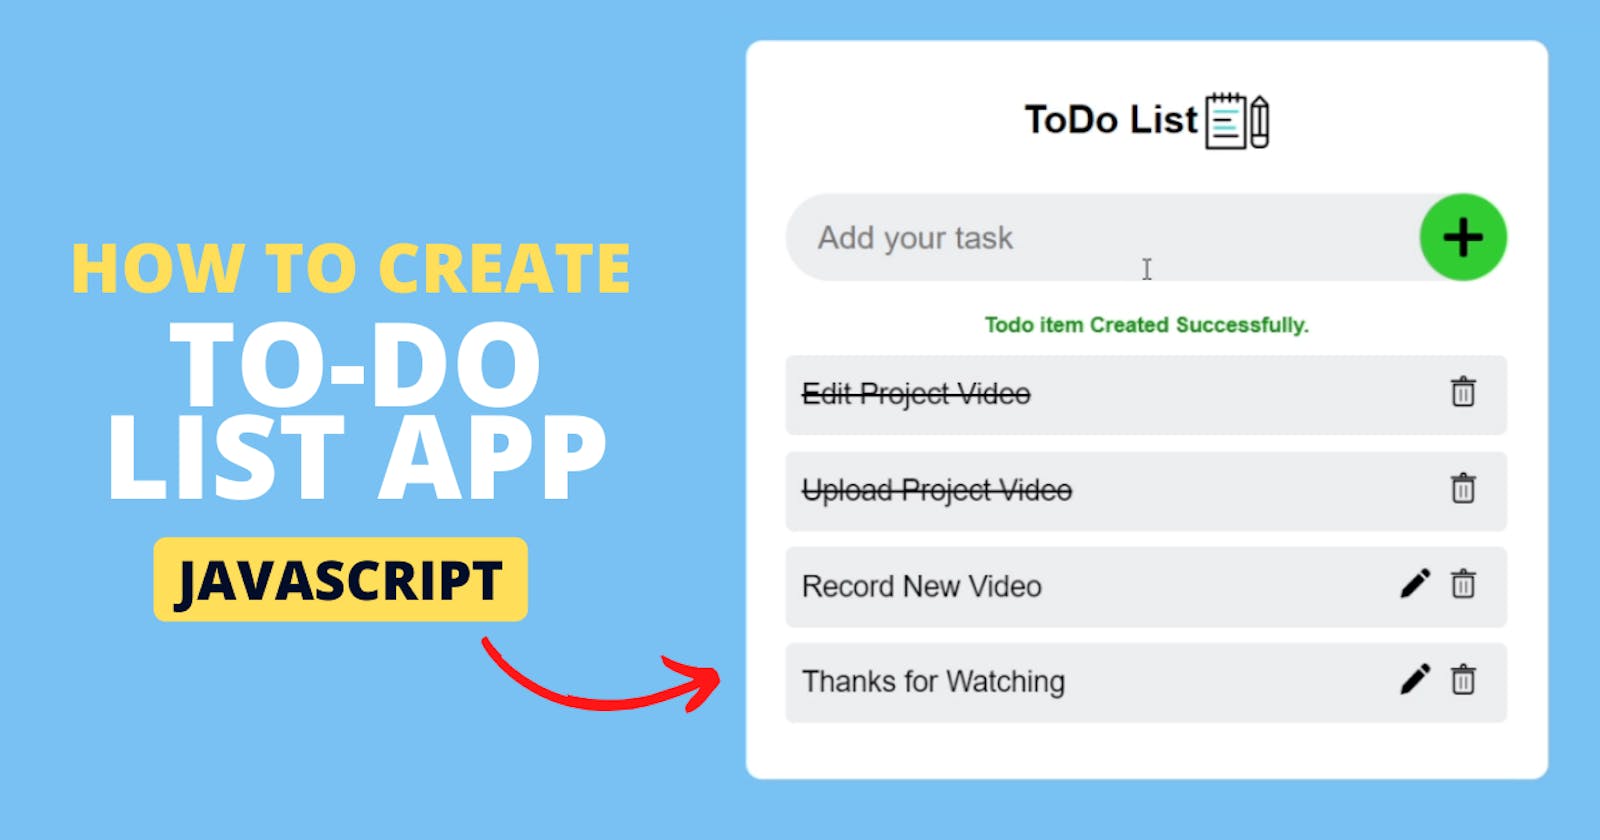 How To Build a Todo List App Using HTML, CSS, and JavaScript